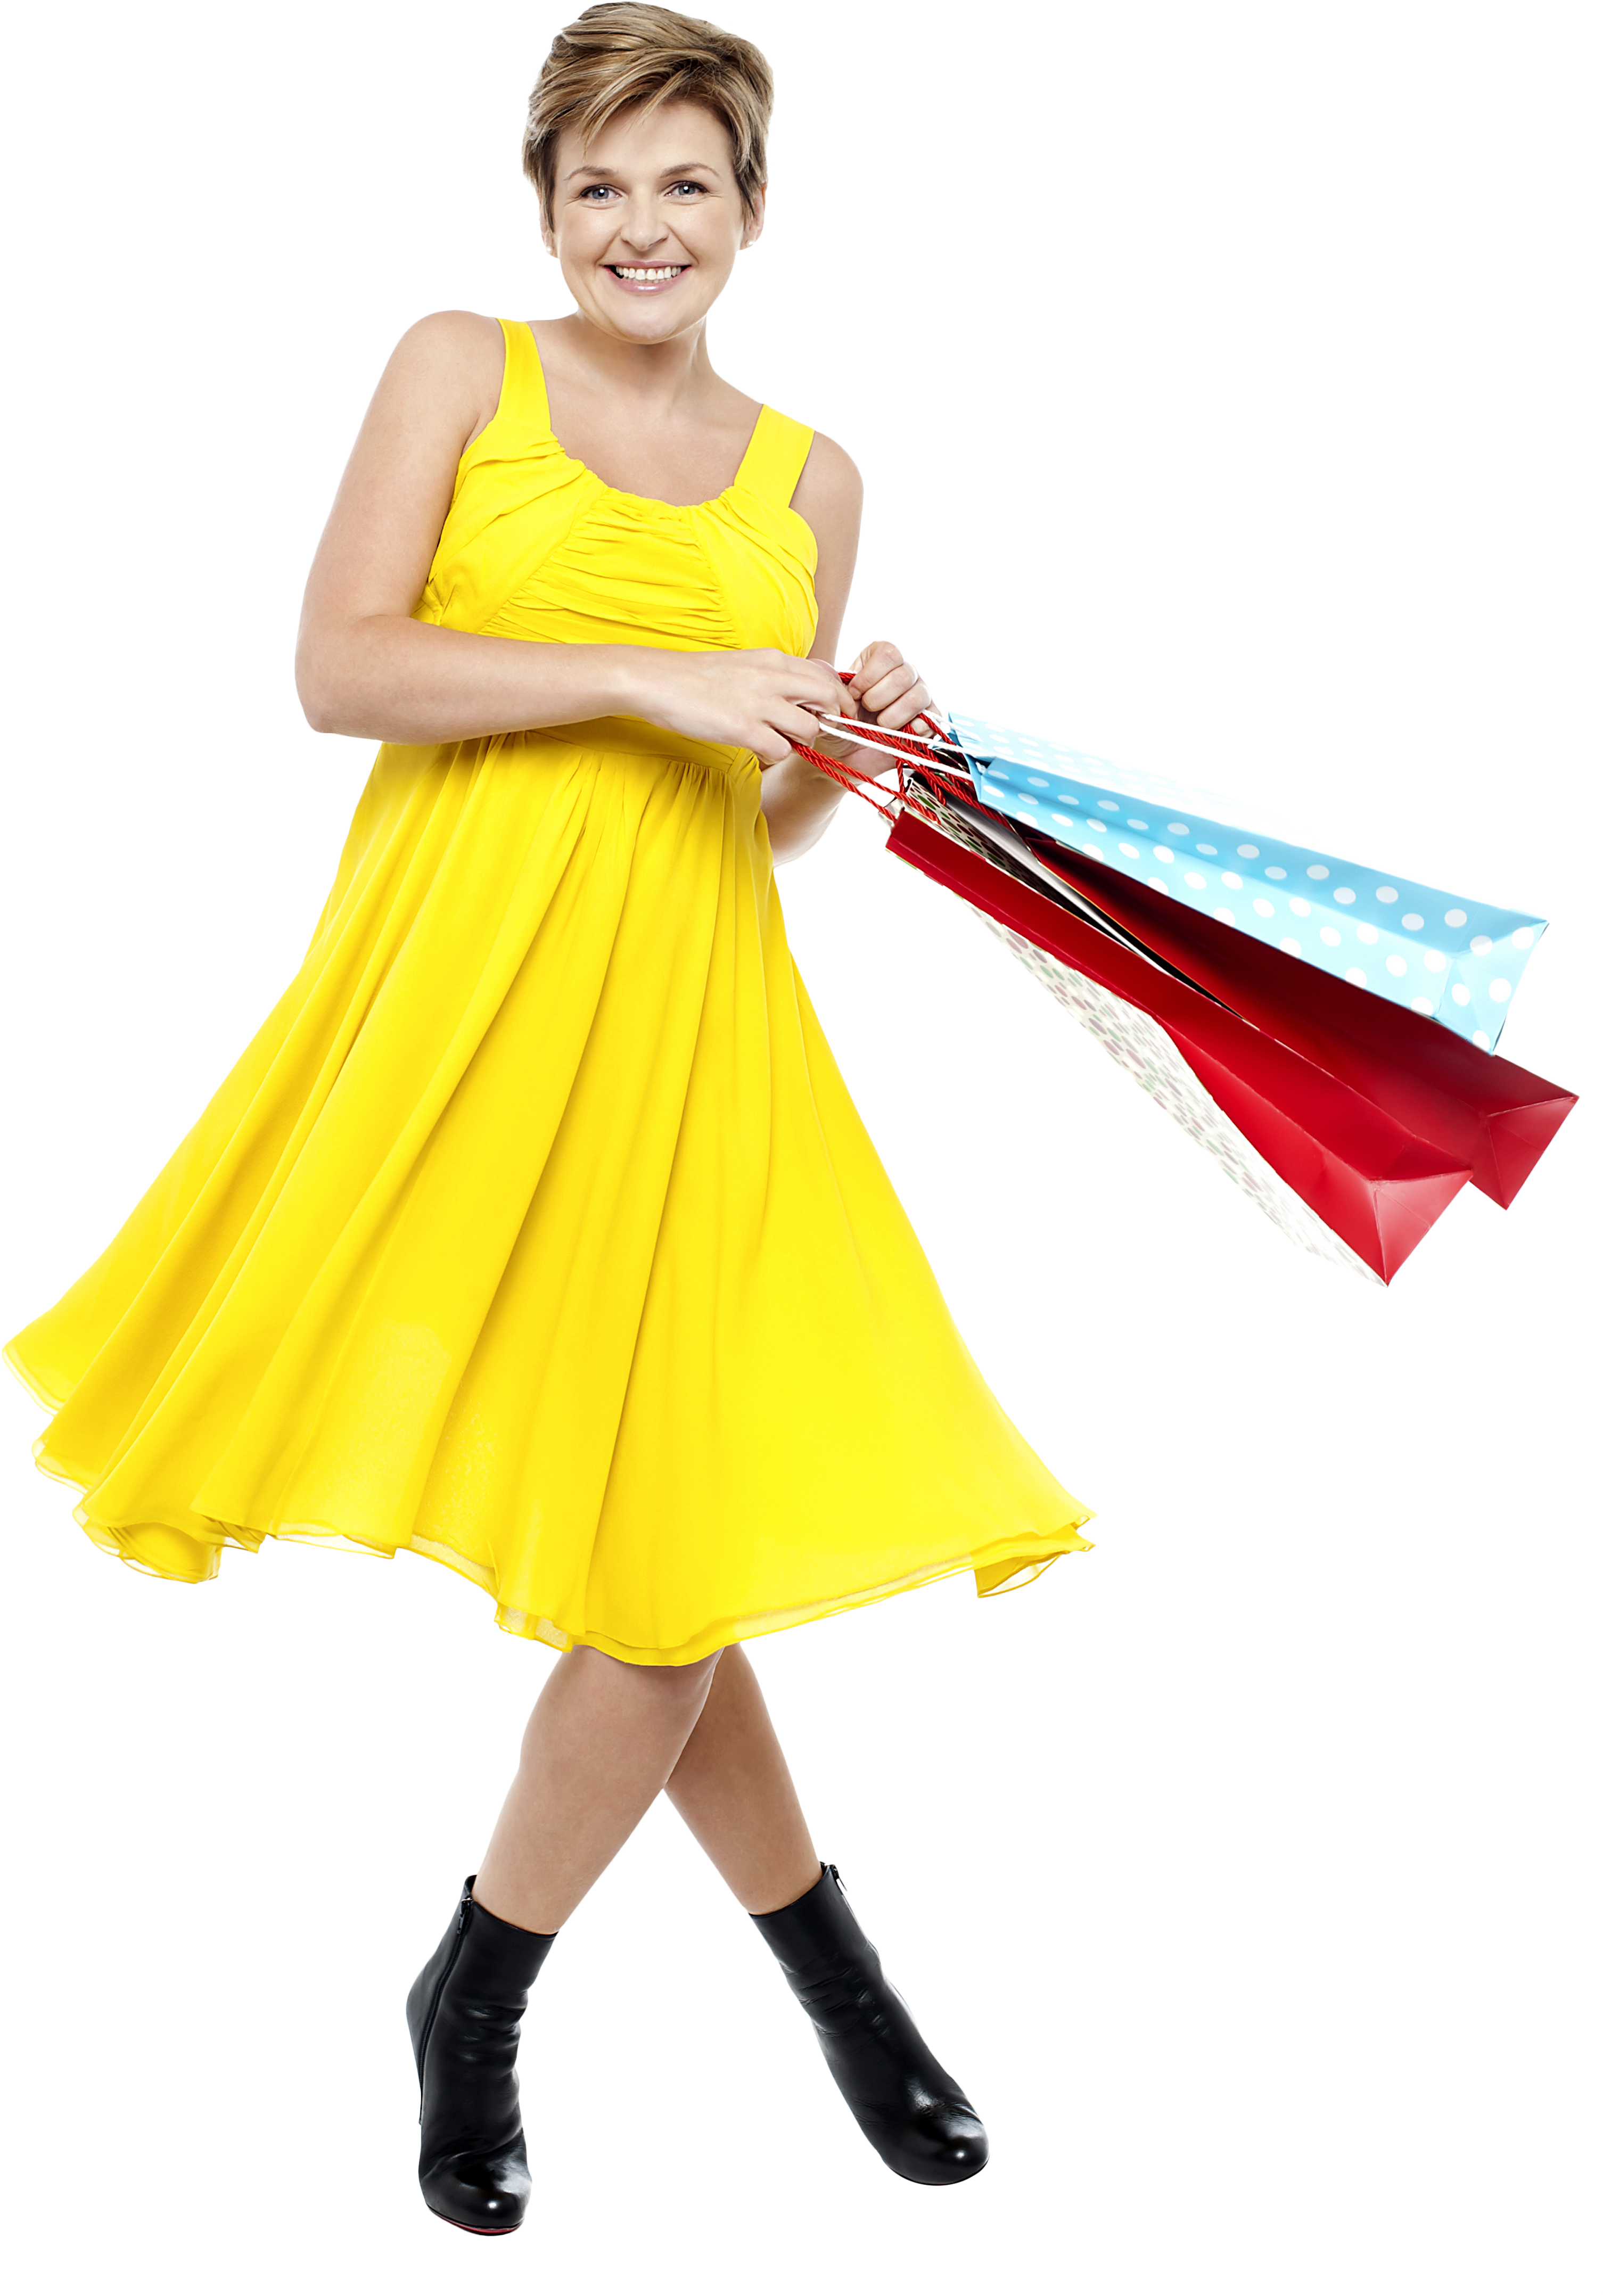 People Shopping Holding Bag Free Png Image - Portable Network Graphics Clipart (3011x4313), Png Download